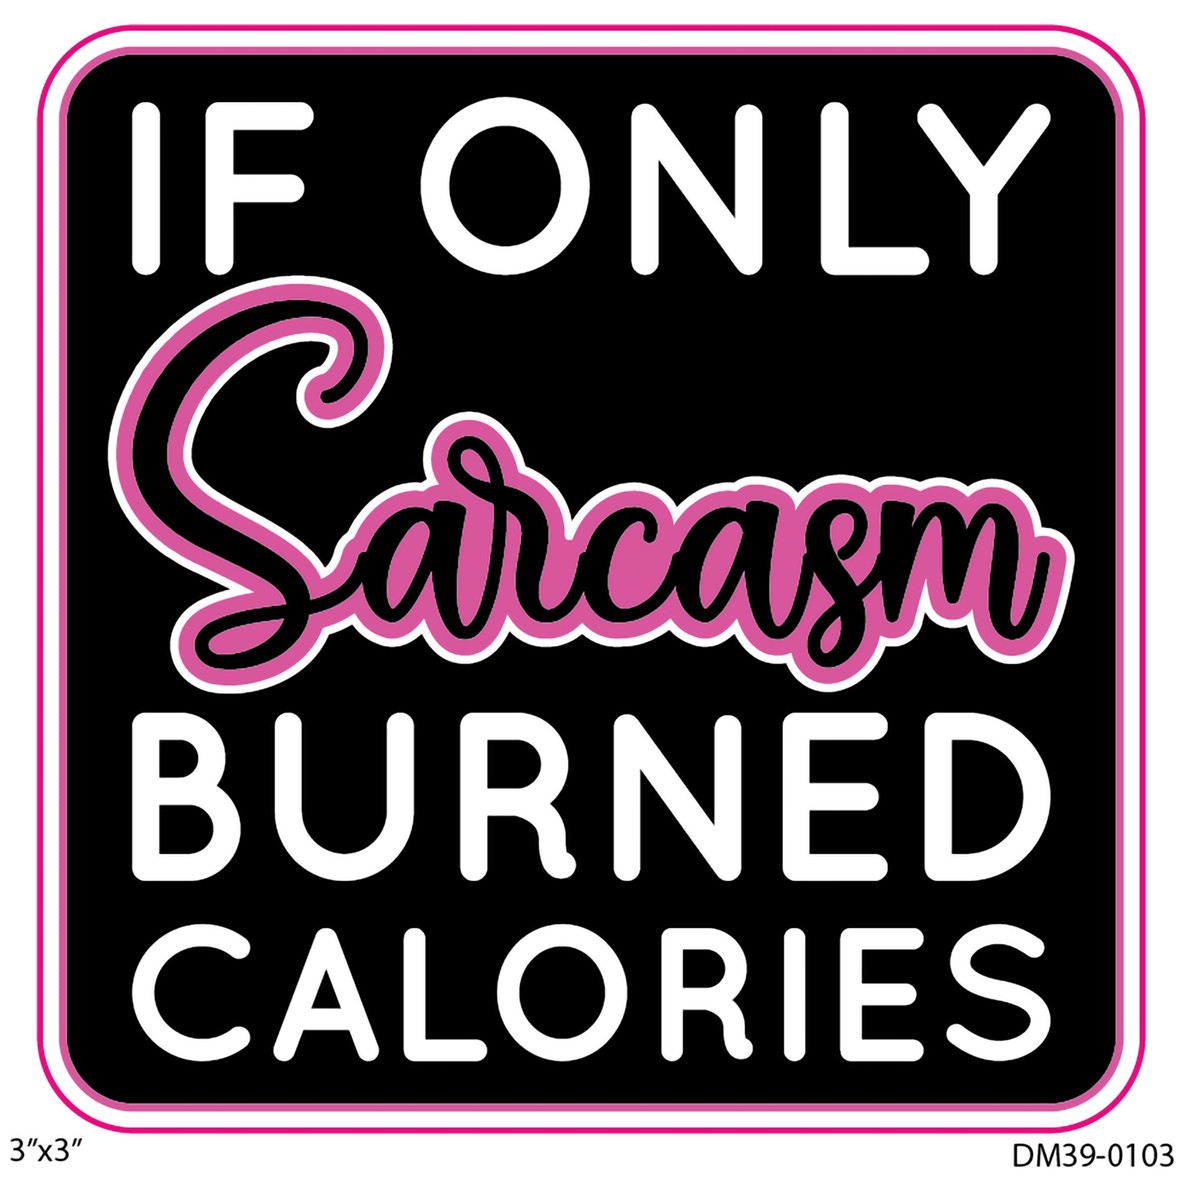 Decal If Only Sarcasm Burned Calories 3i